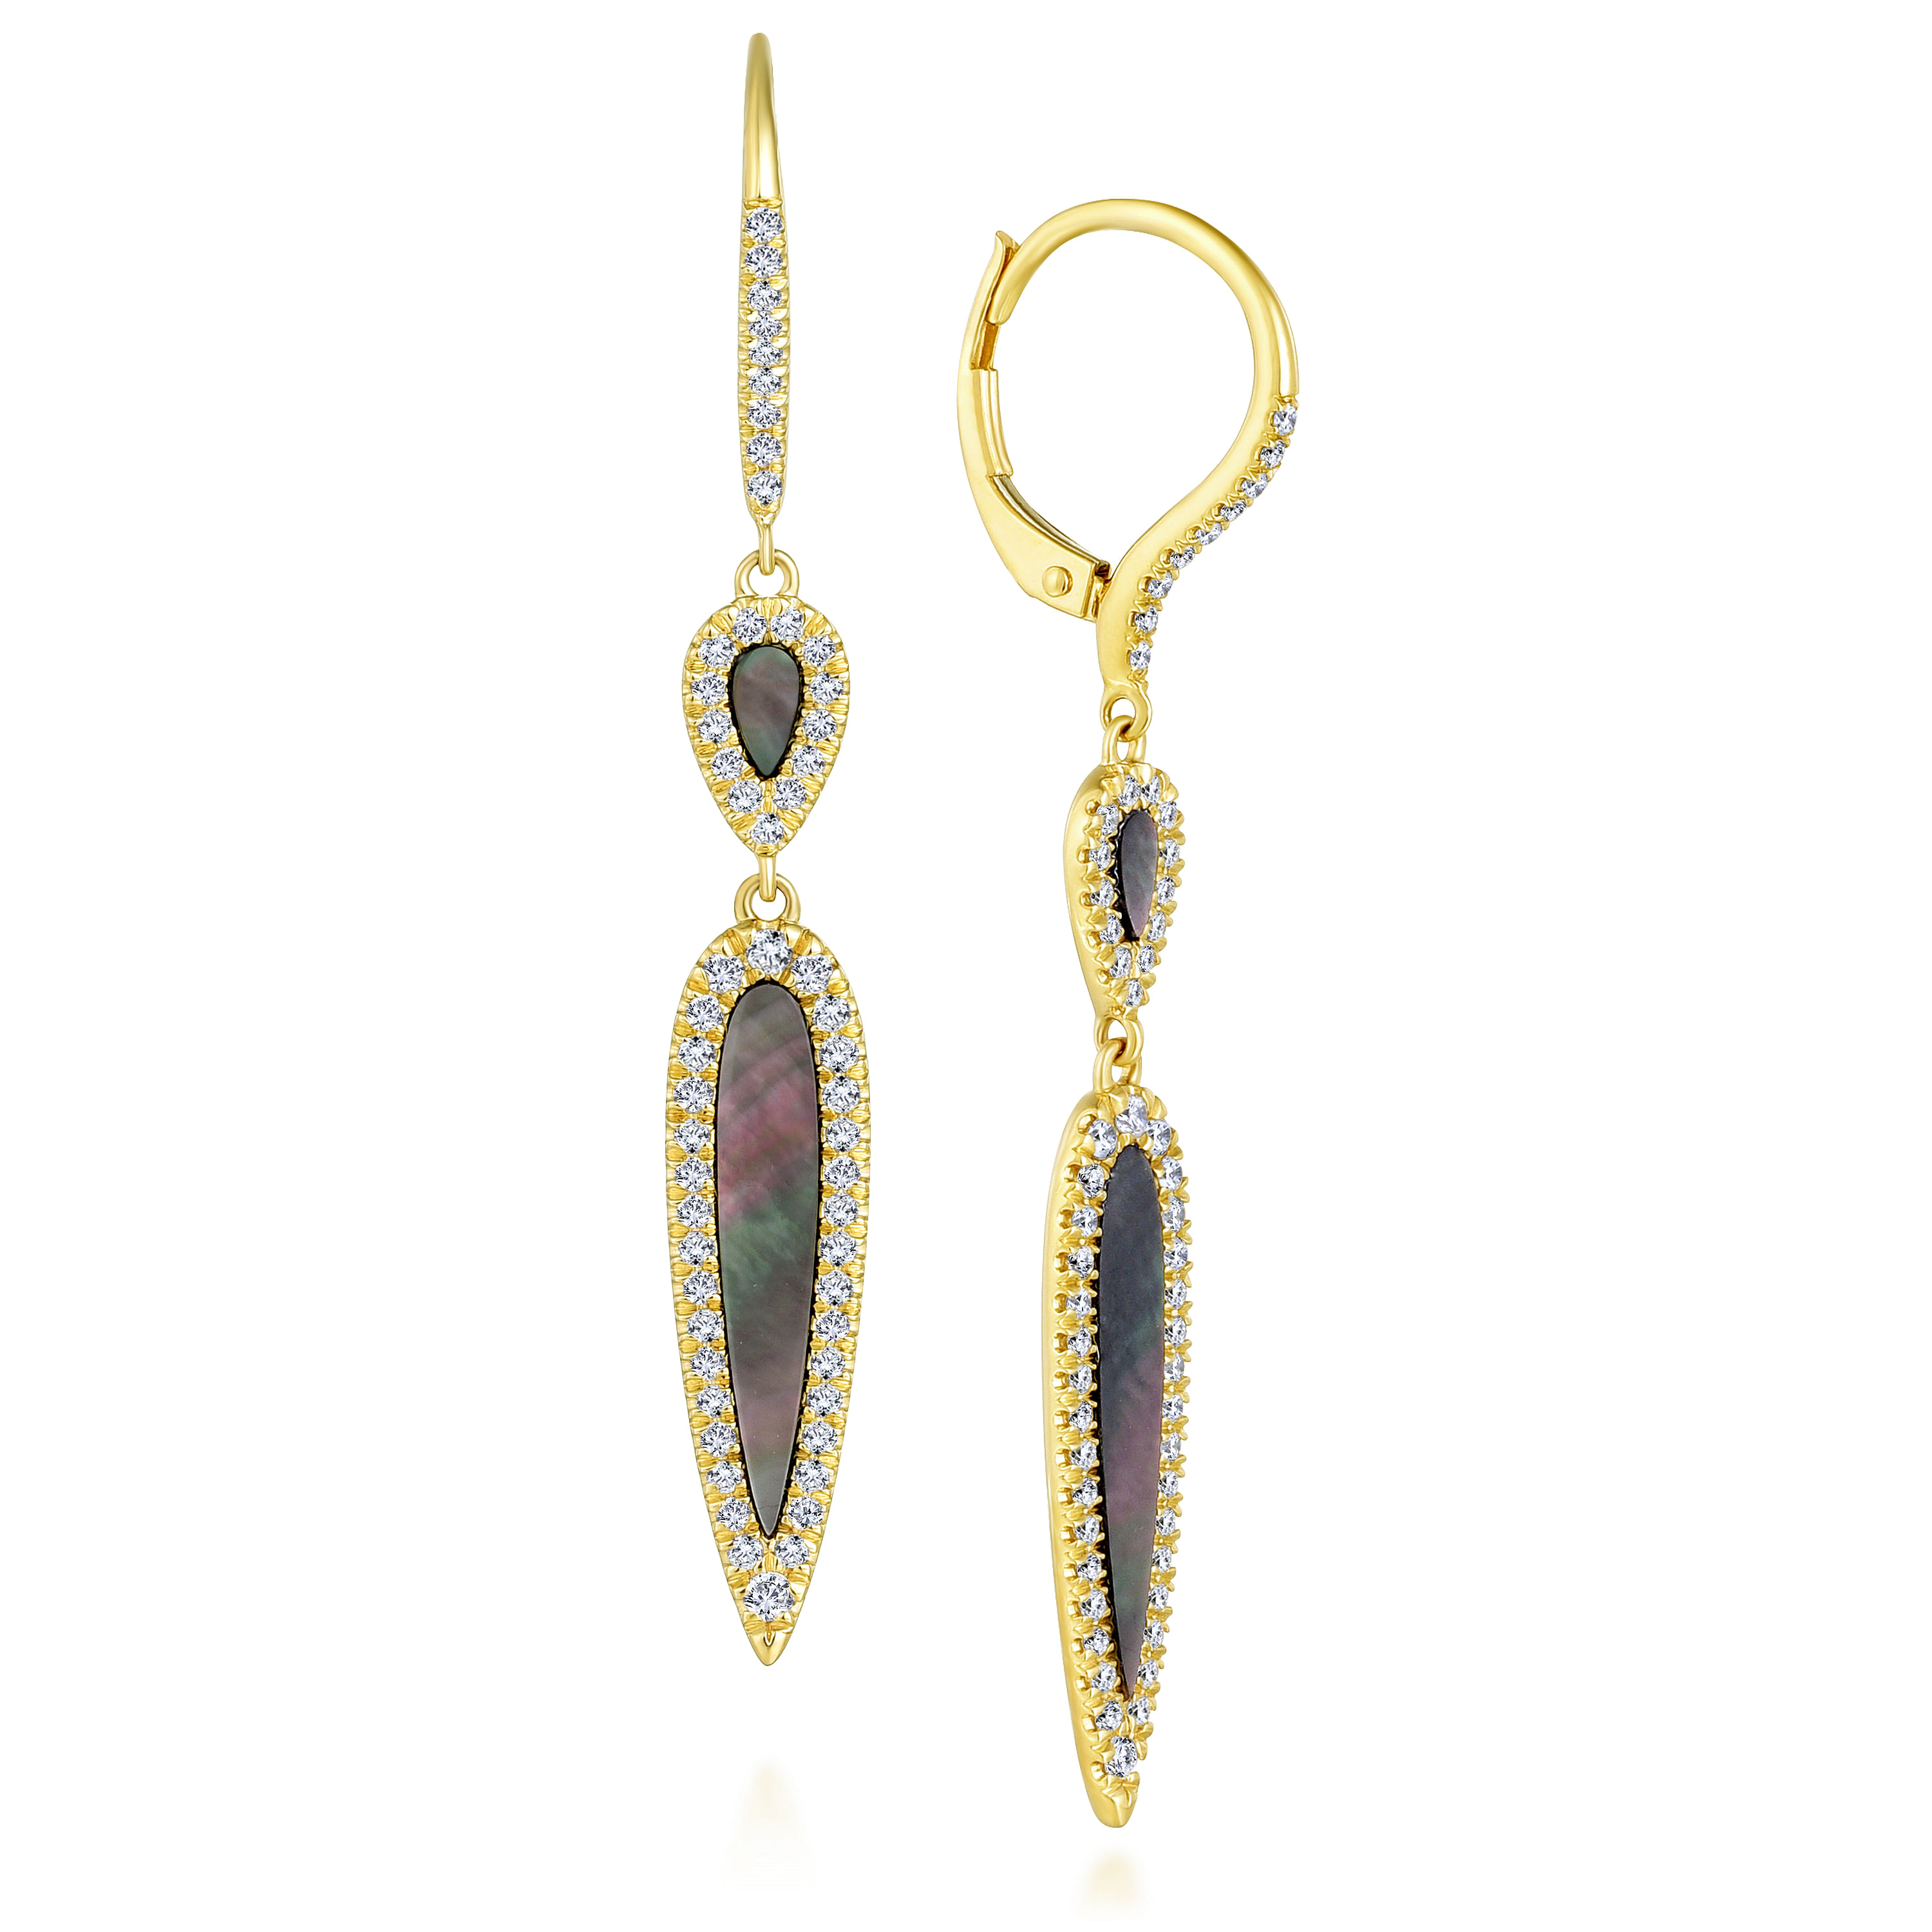 14K Yellow Gold Linear Double Teardrop Earrings with Diamonds and Black Mother of Pearl Inlay